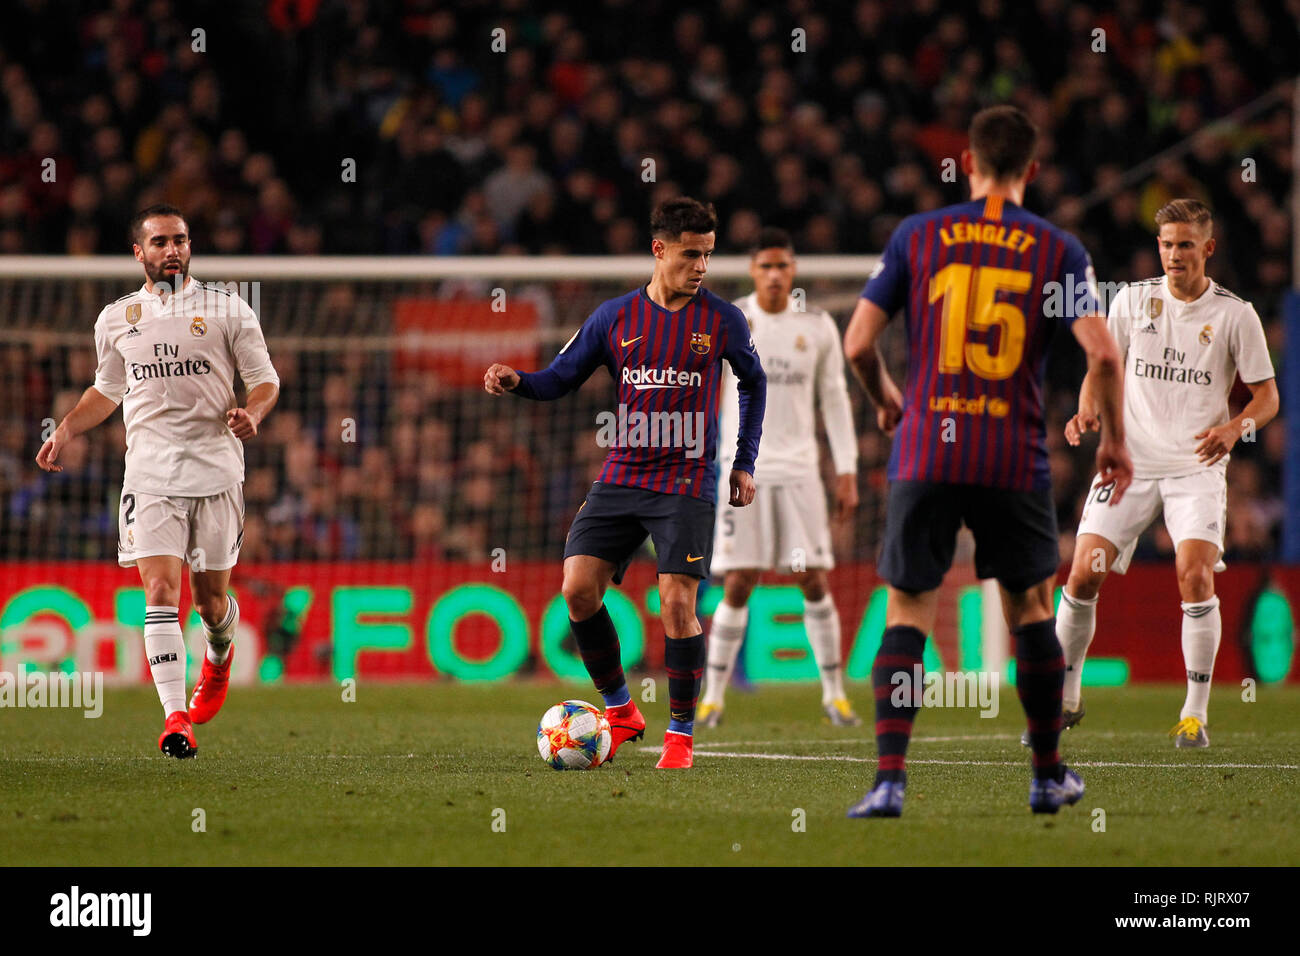 Spain La Copa, Semi finals, First Leg, FC Barcelona vs. Real Madrid, reporting live during the game Stock Photo